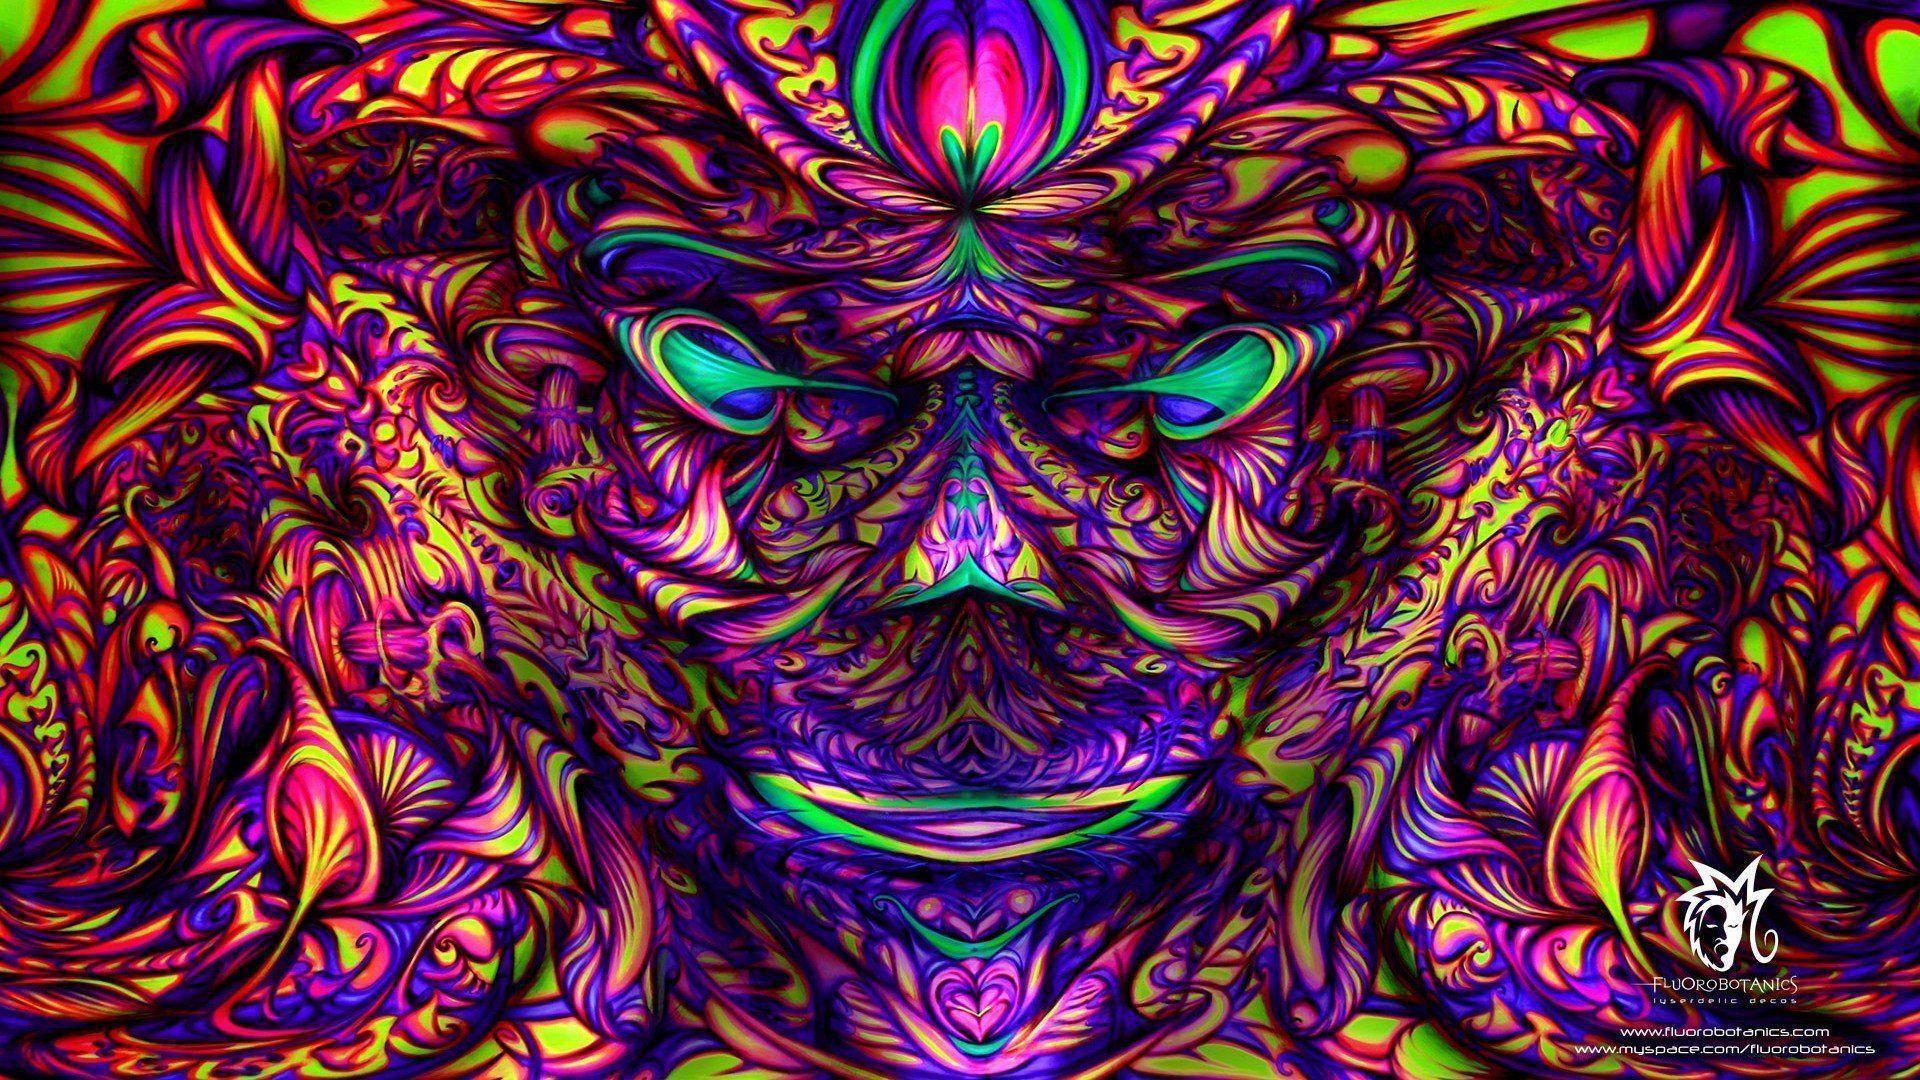 Psy Trance  The Essence 3 Full HD by allansbo on DeviantArt